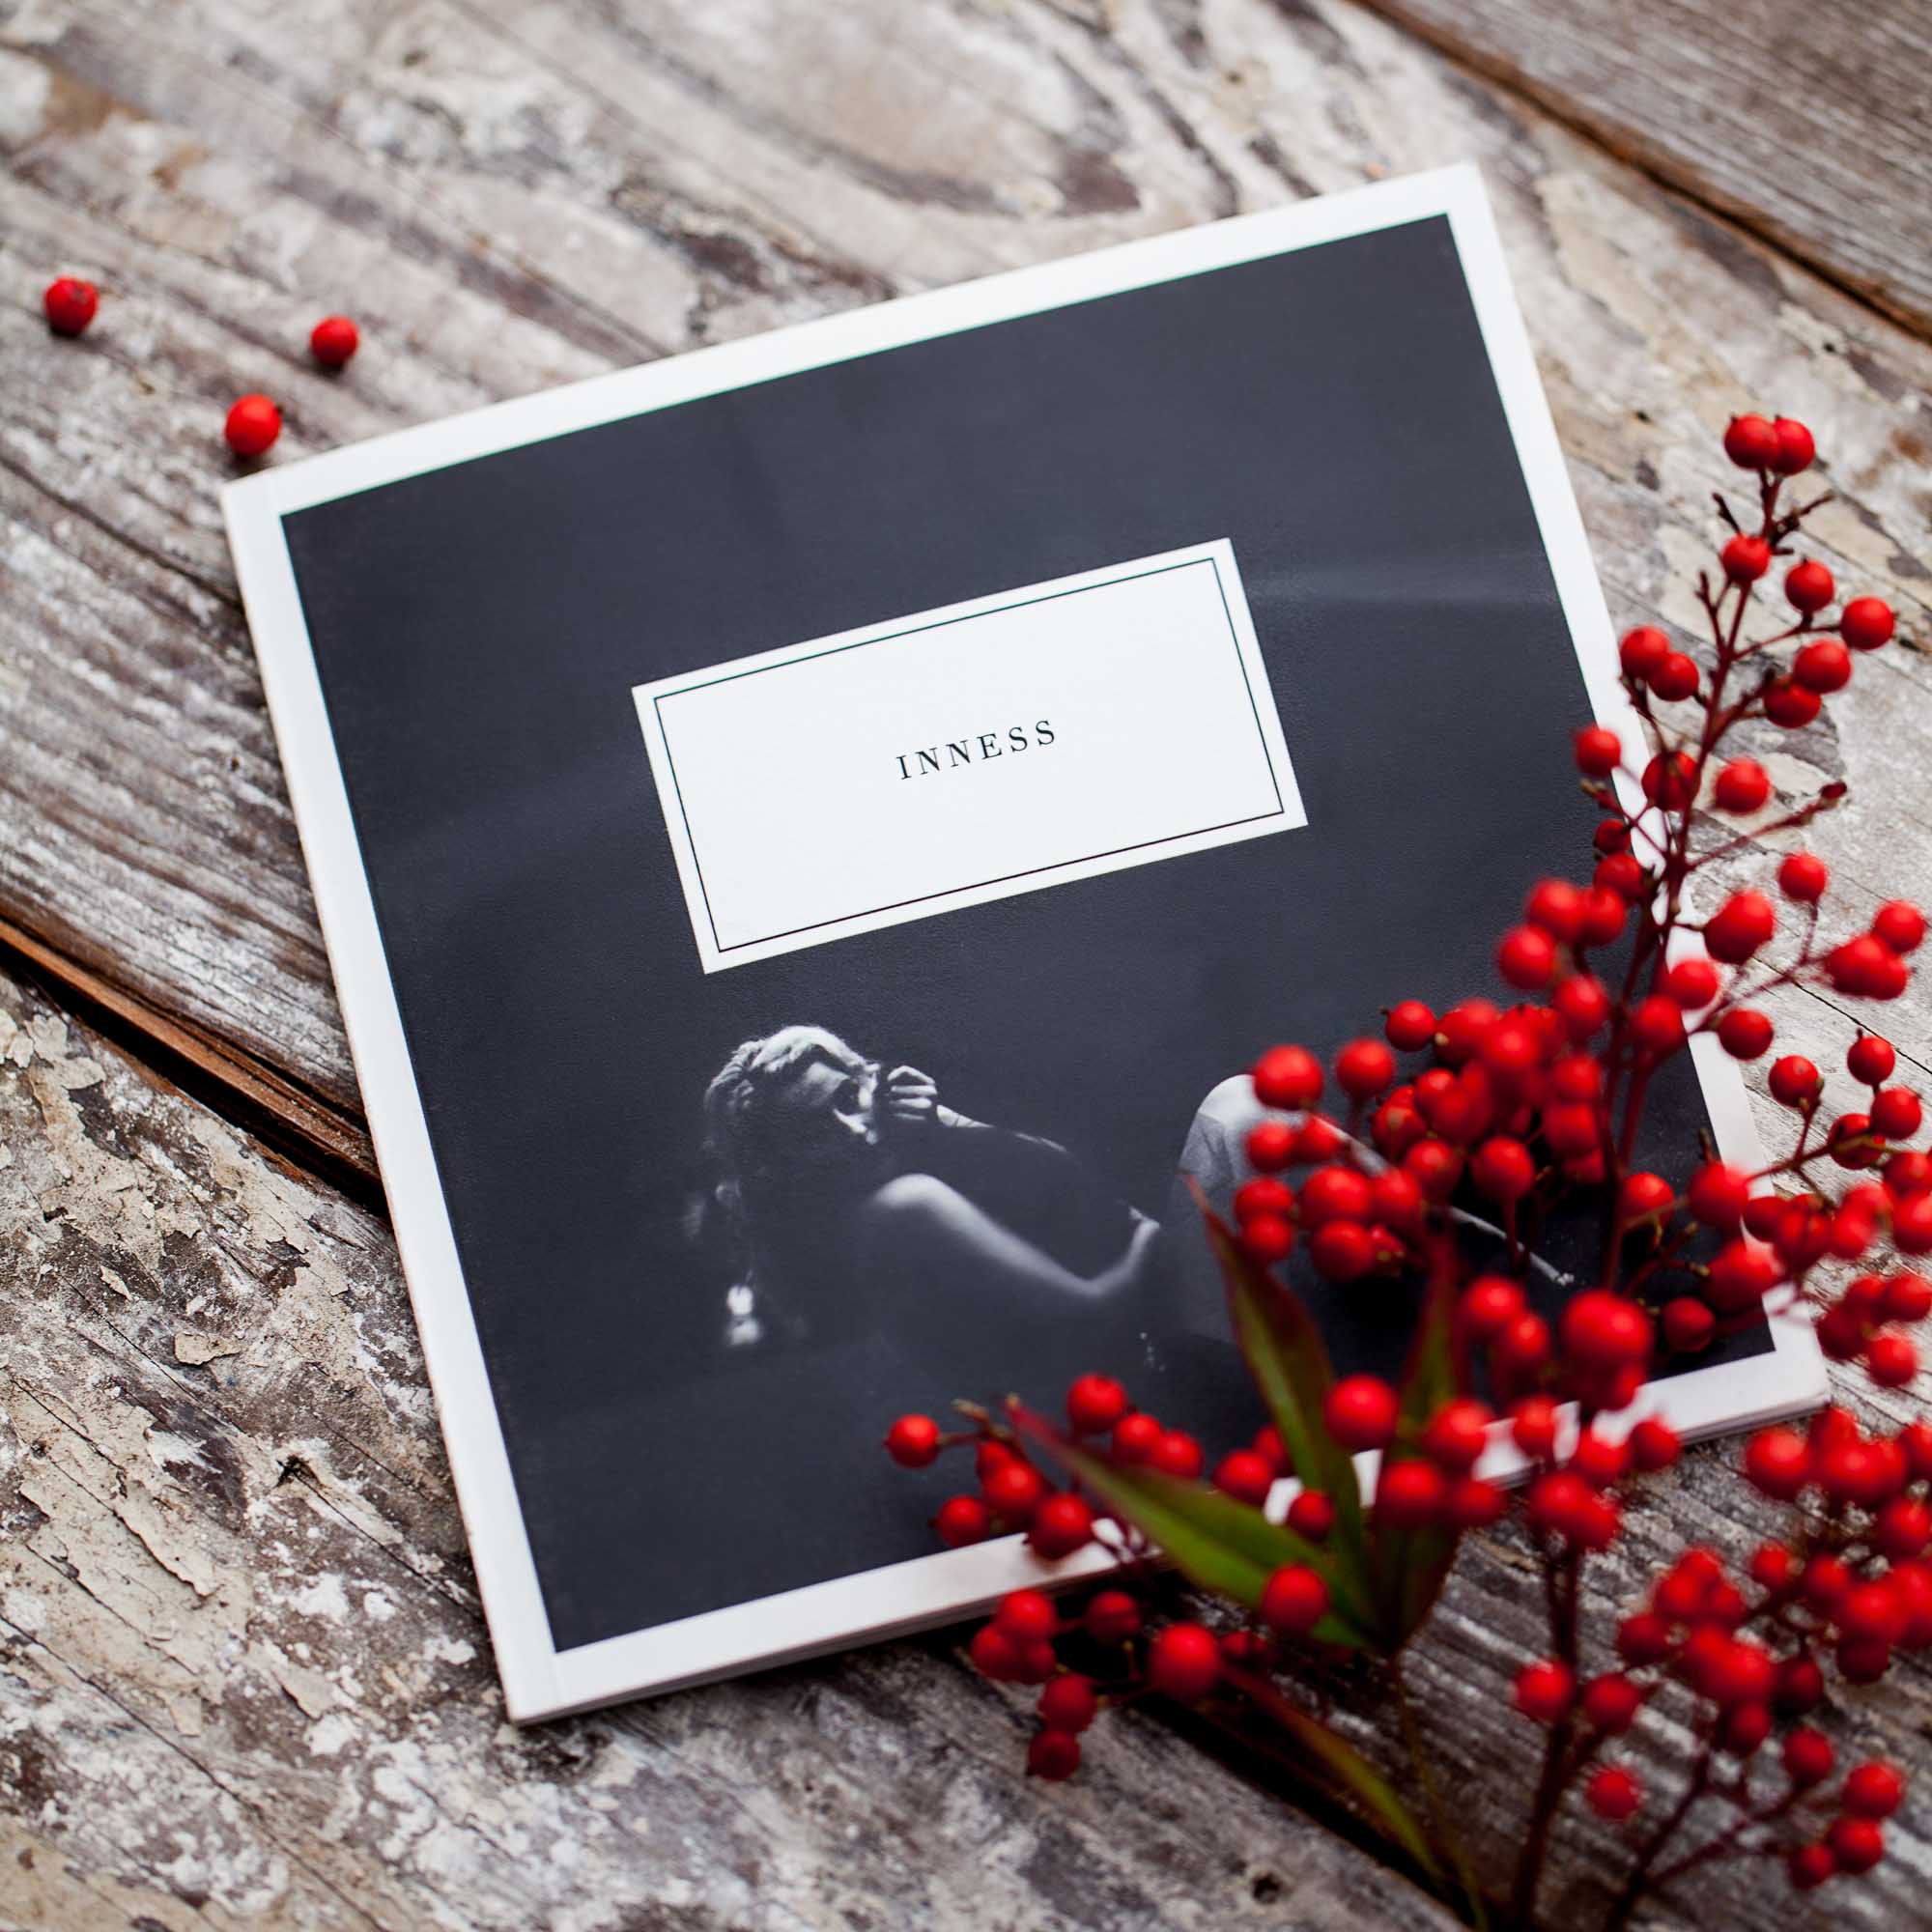 Holiday soft cover albums by Dana Kae Photography in Seattle, Washington